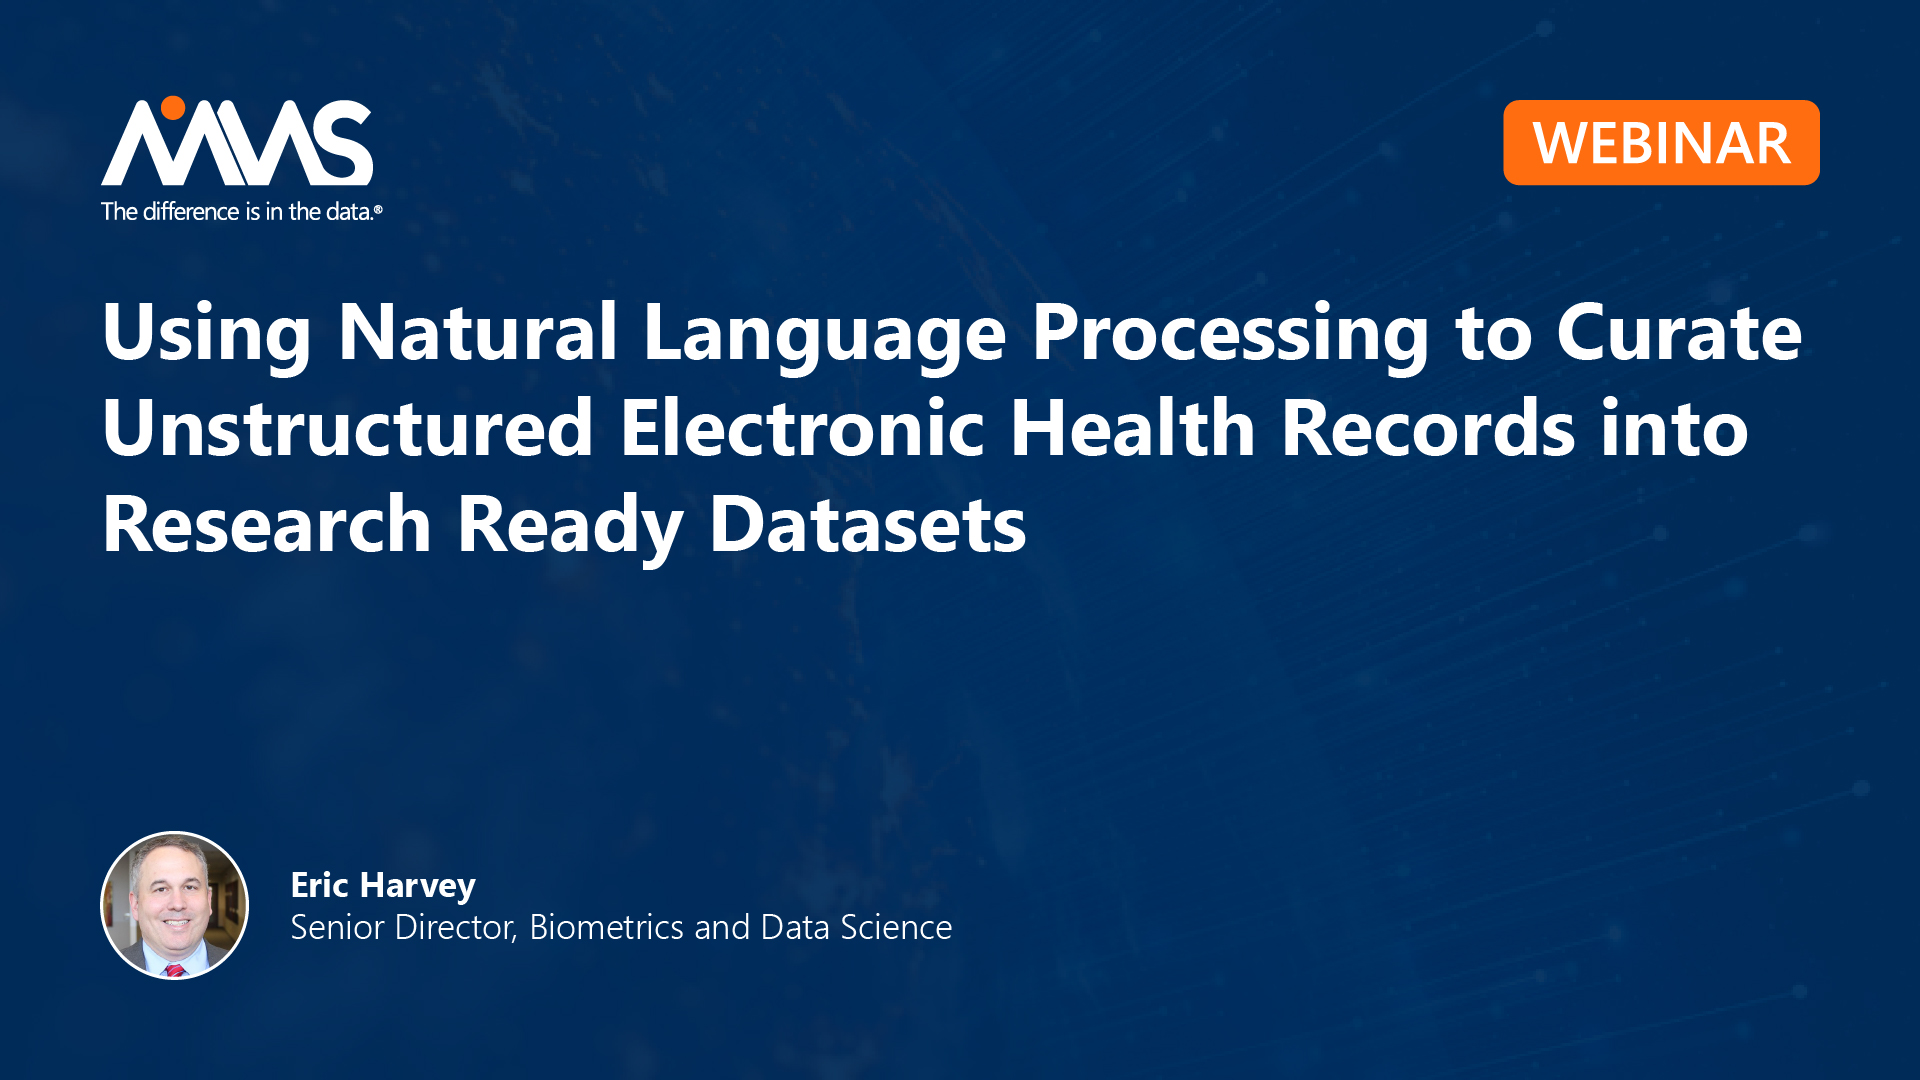 Using Natural Language Processing (NLP) to curate unstructured EHR